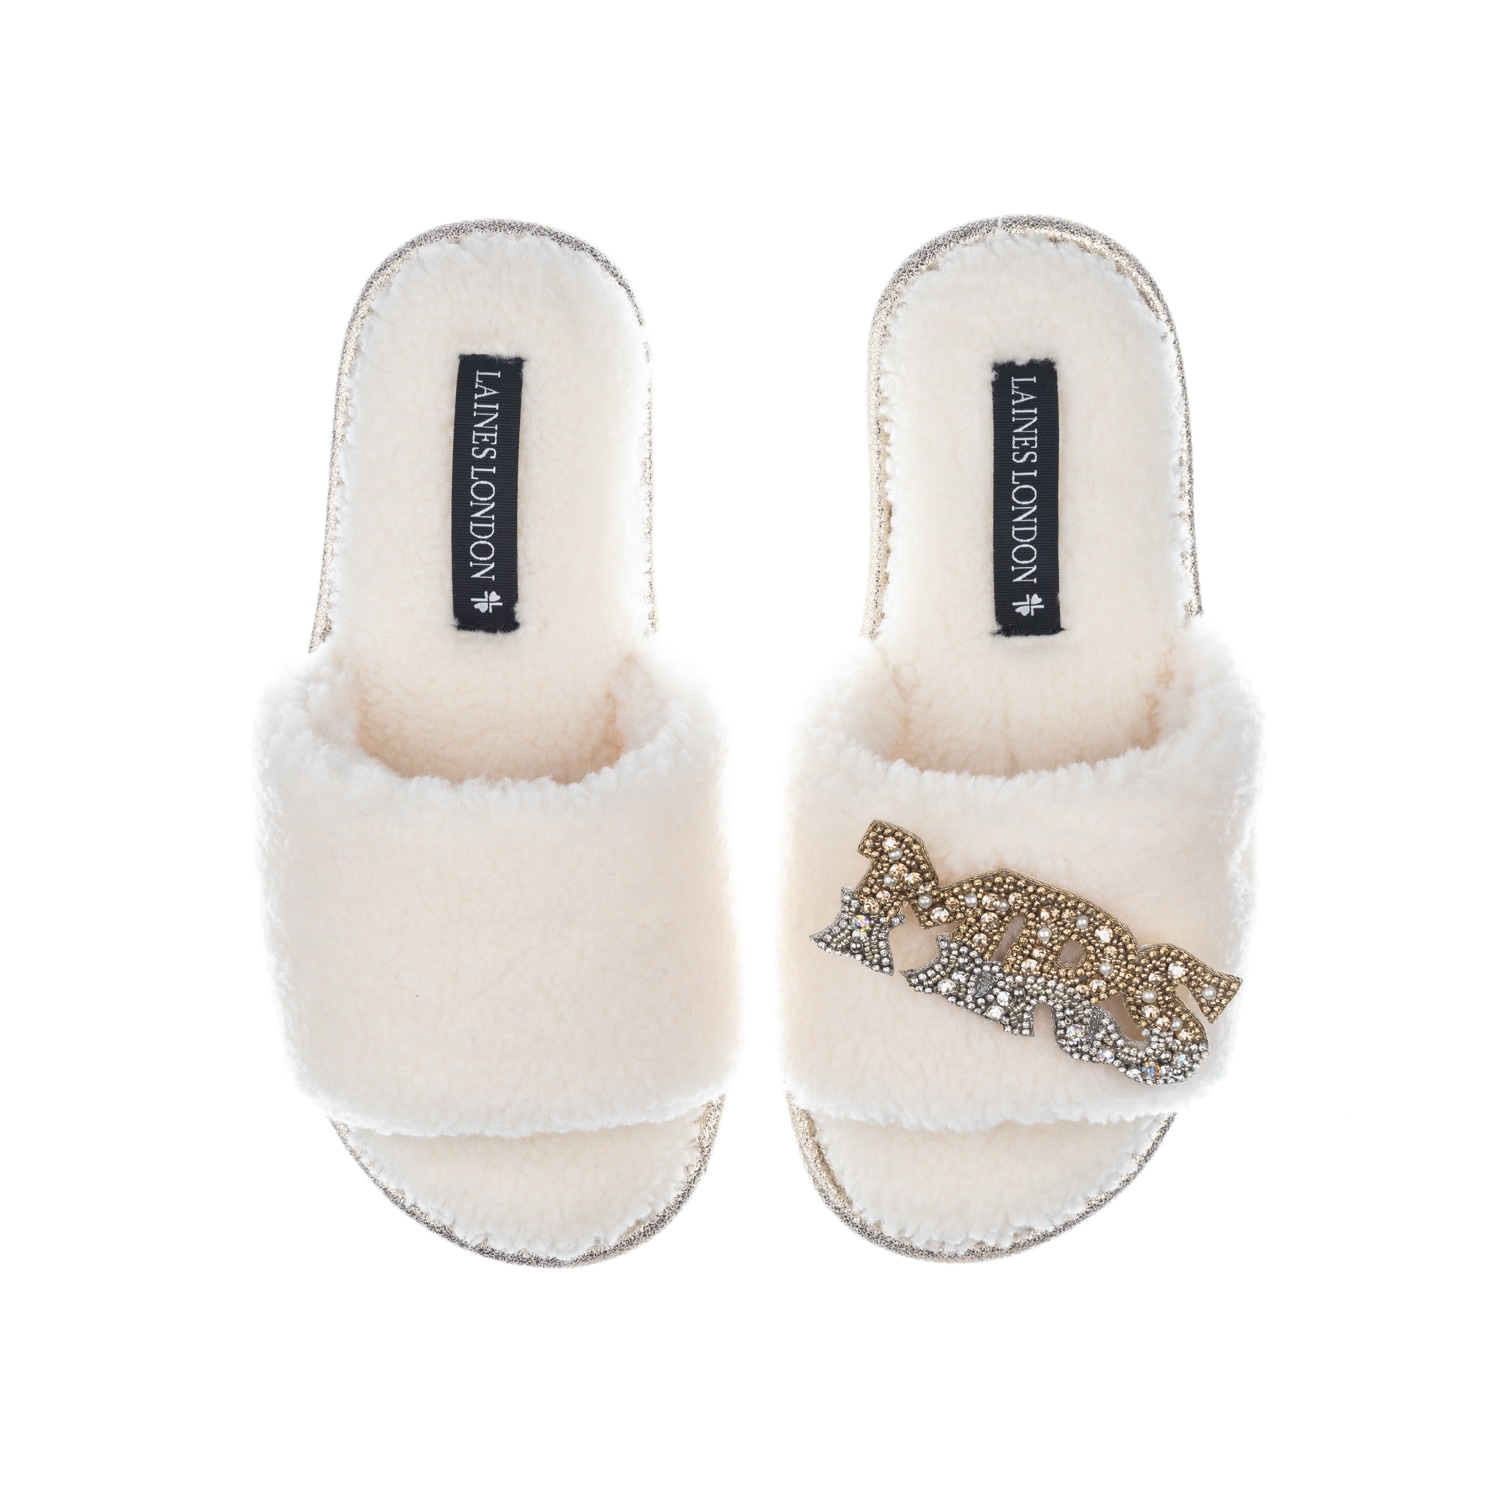 Laines London Women's White Teddy Towelling Slipper Sliders With Mrs Brooch - Cream